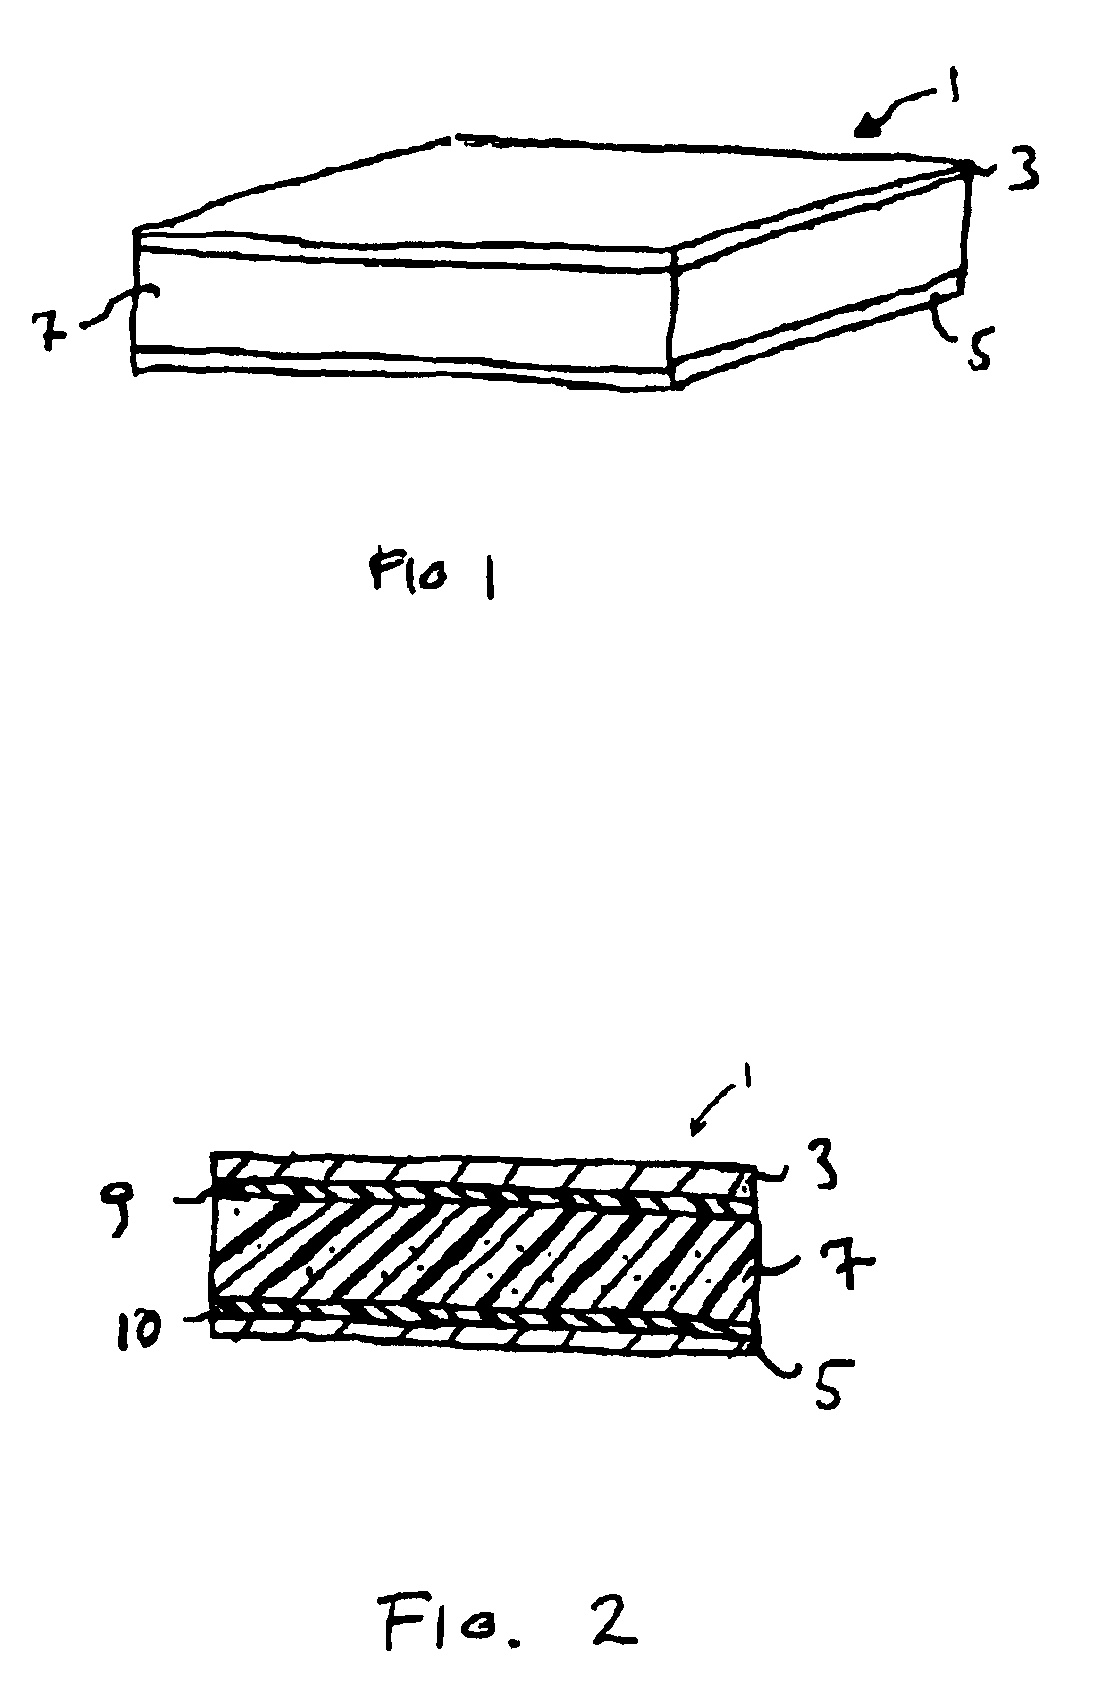 Electrical devices containing conductive polymers